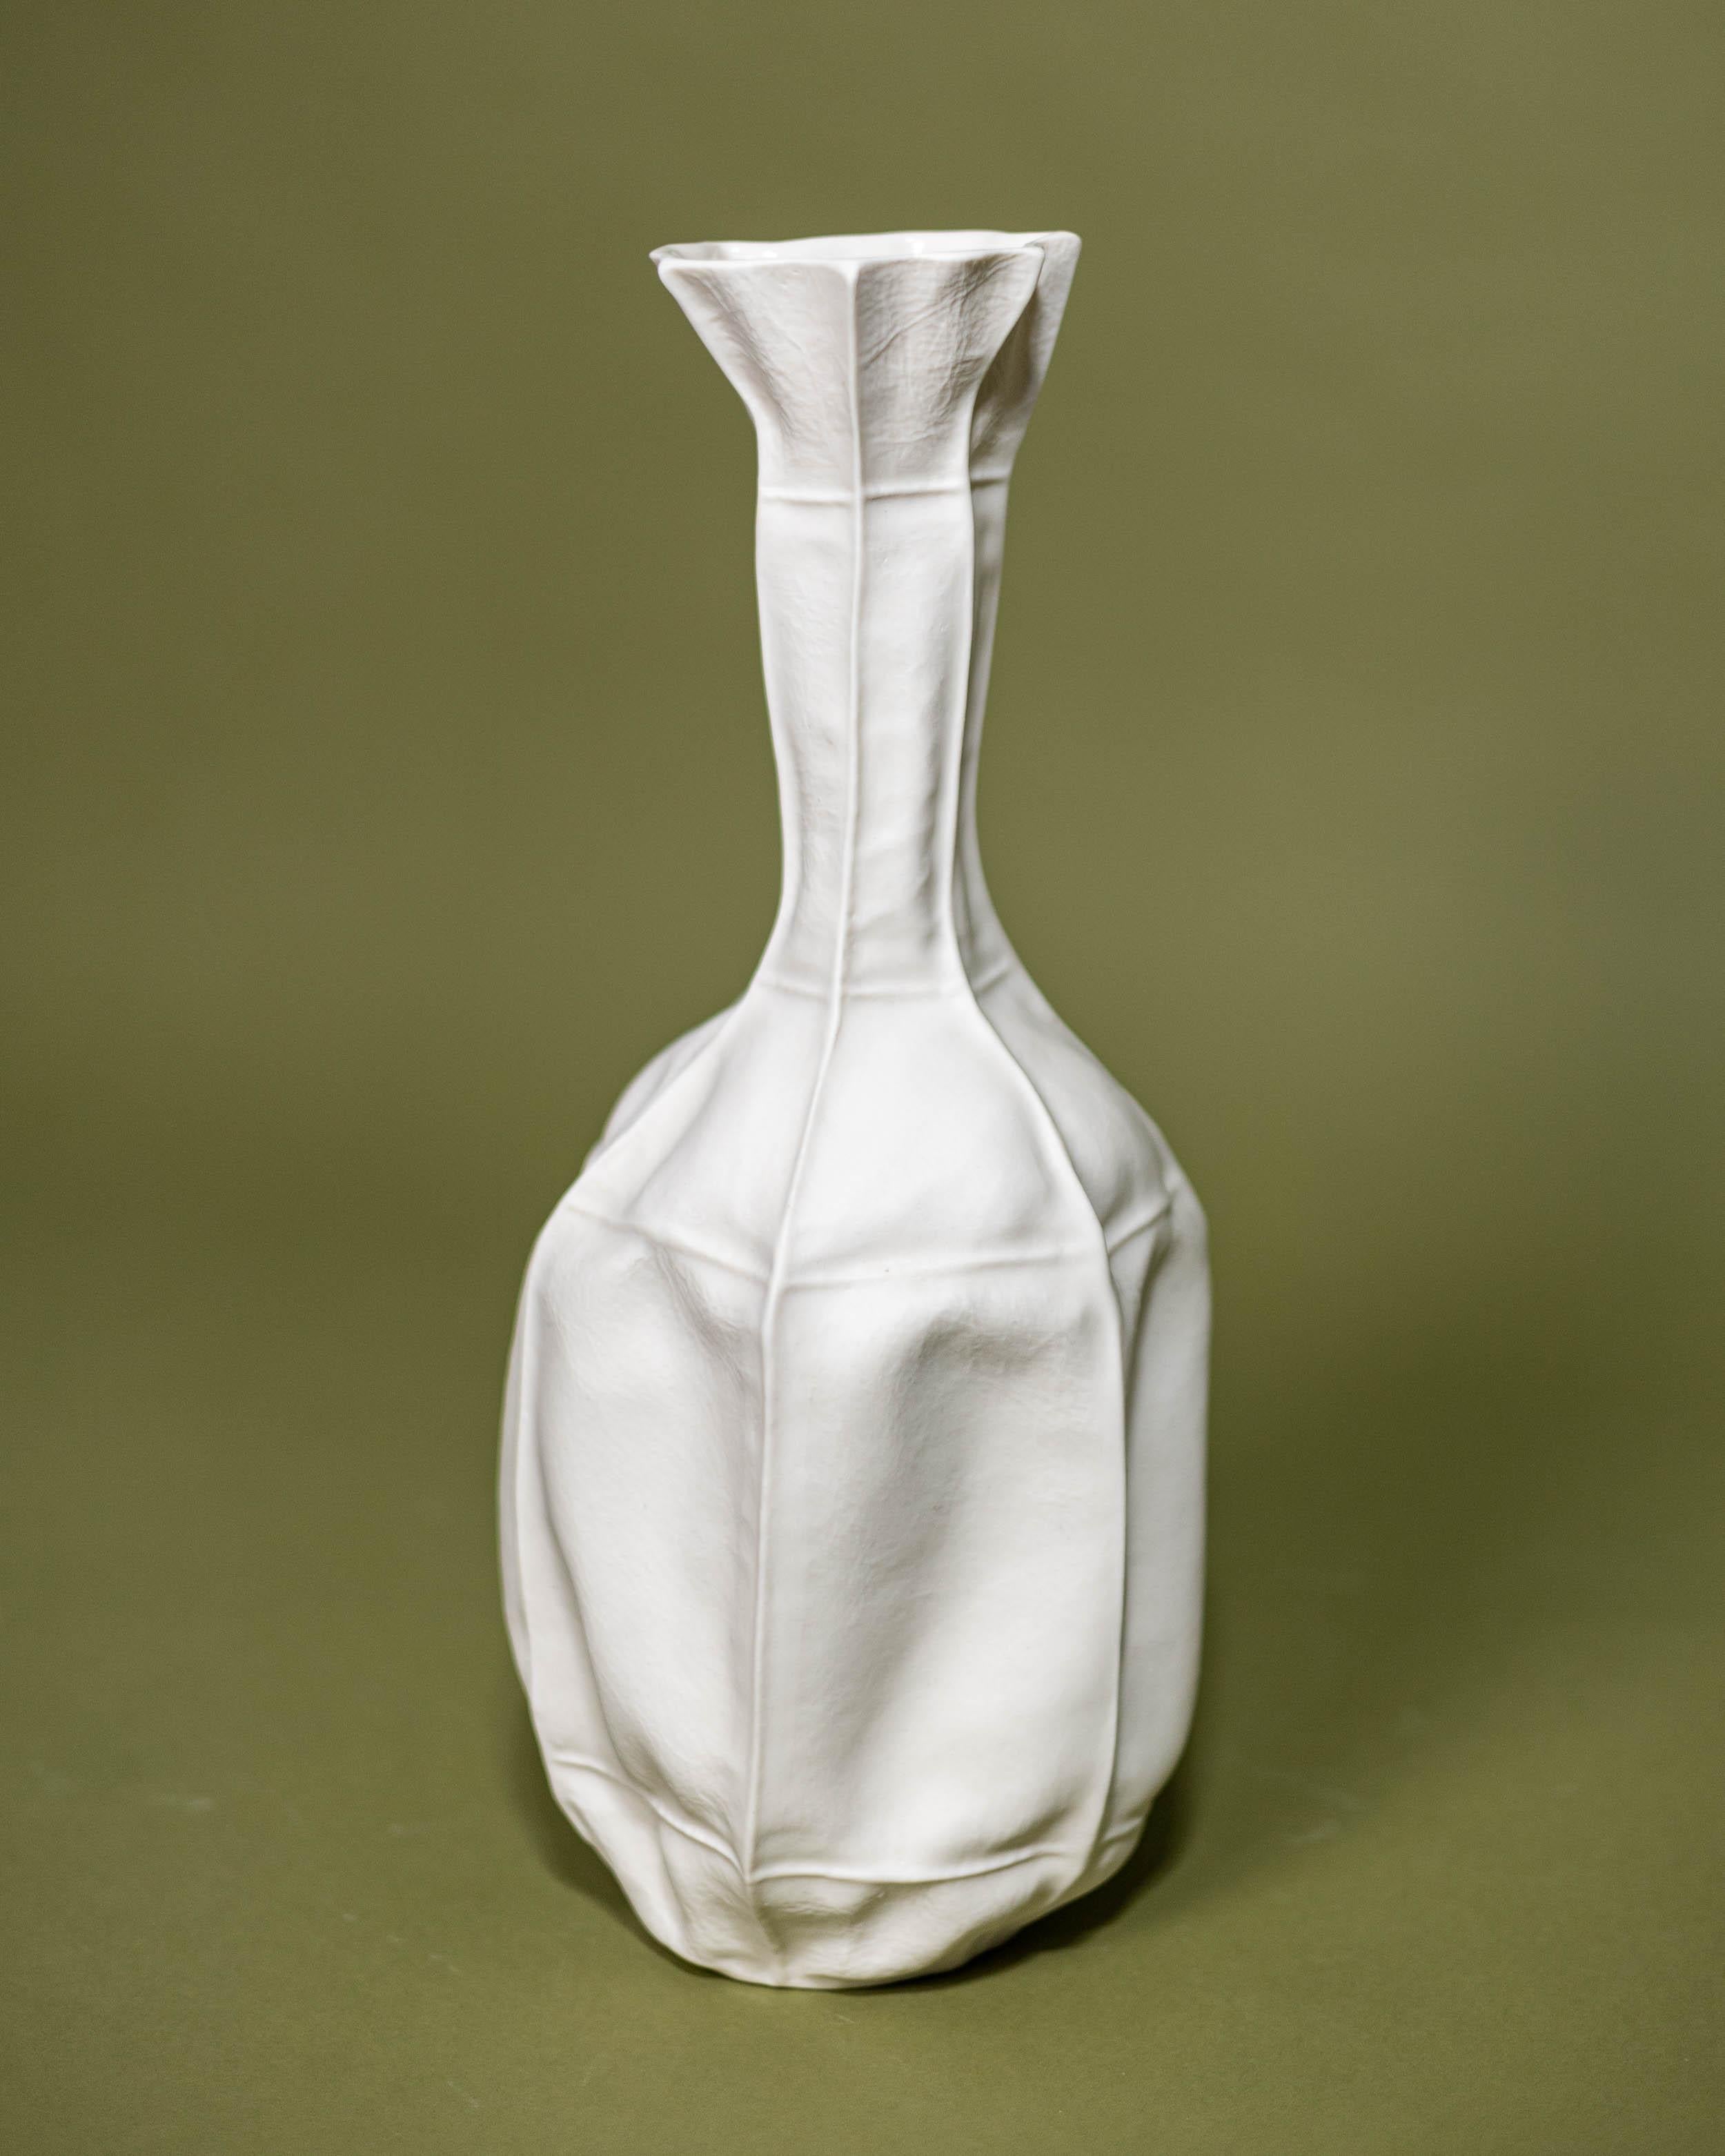 Pair of Sculptural White Ceramic Kawa Vases, by Luft Tanaka, organic, porcelain For Sale 2